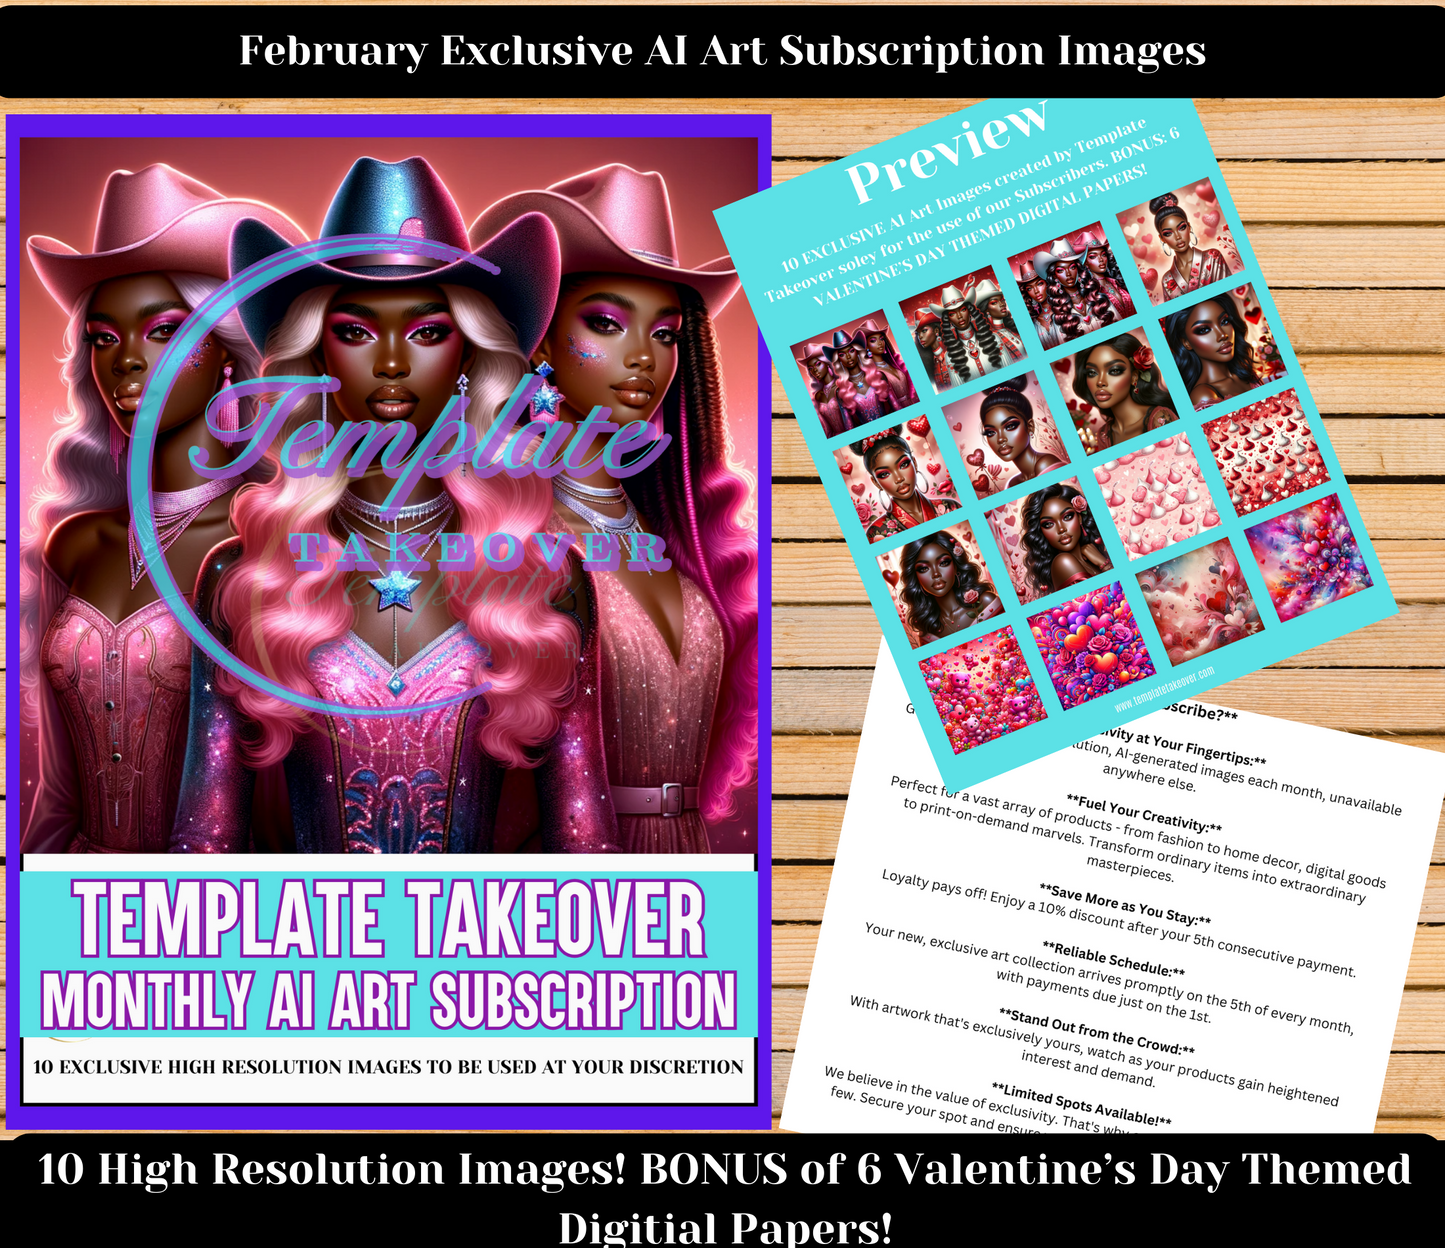 ***January Exclusive Monthly AI Art Subscription***